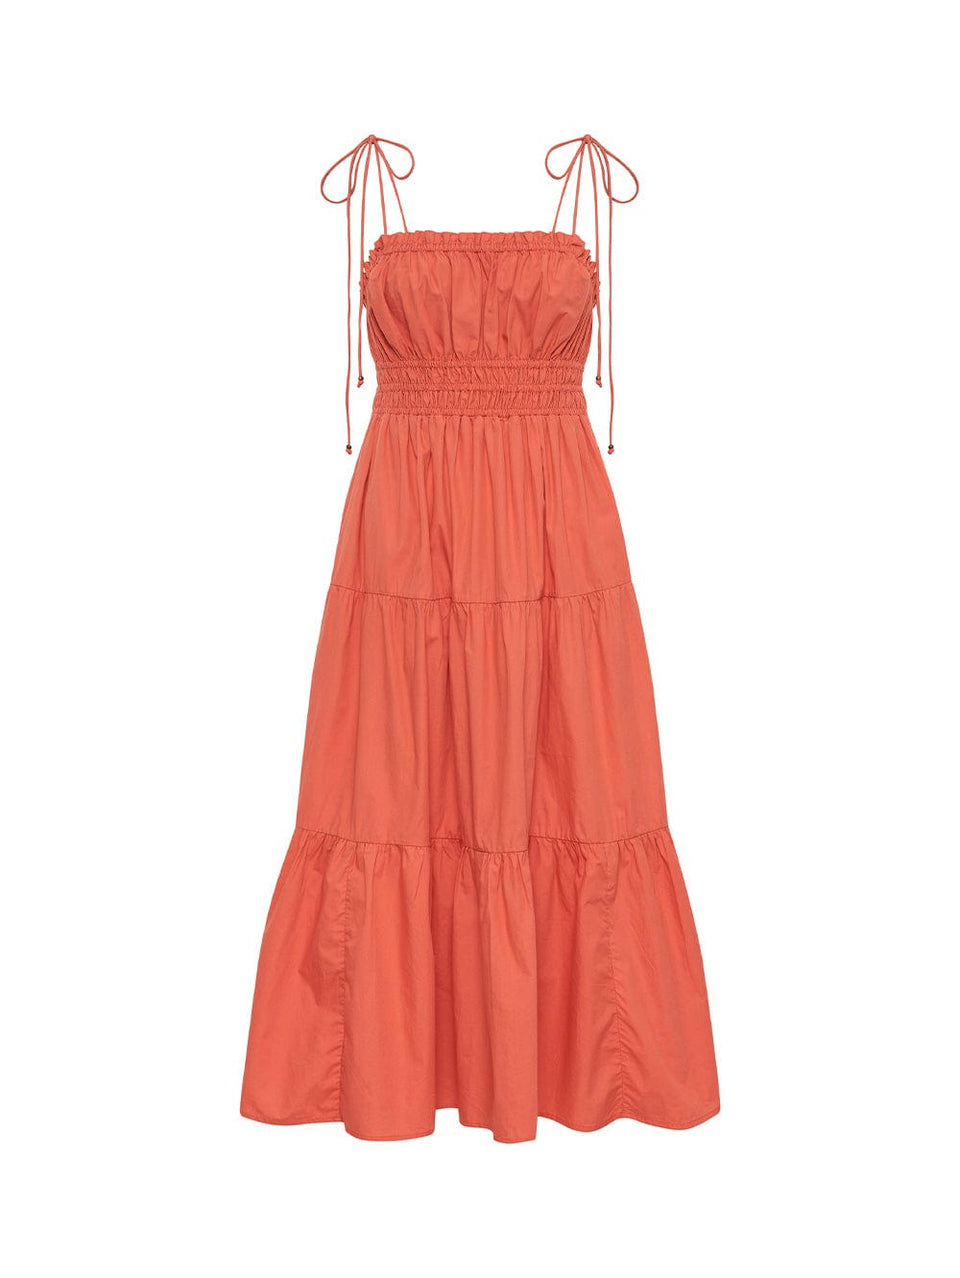 Ghost image of KIVARI Casini dress - a coral block colour dress with thin straps, elasticated waist and tiered skirt.